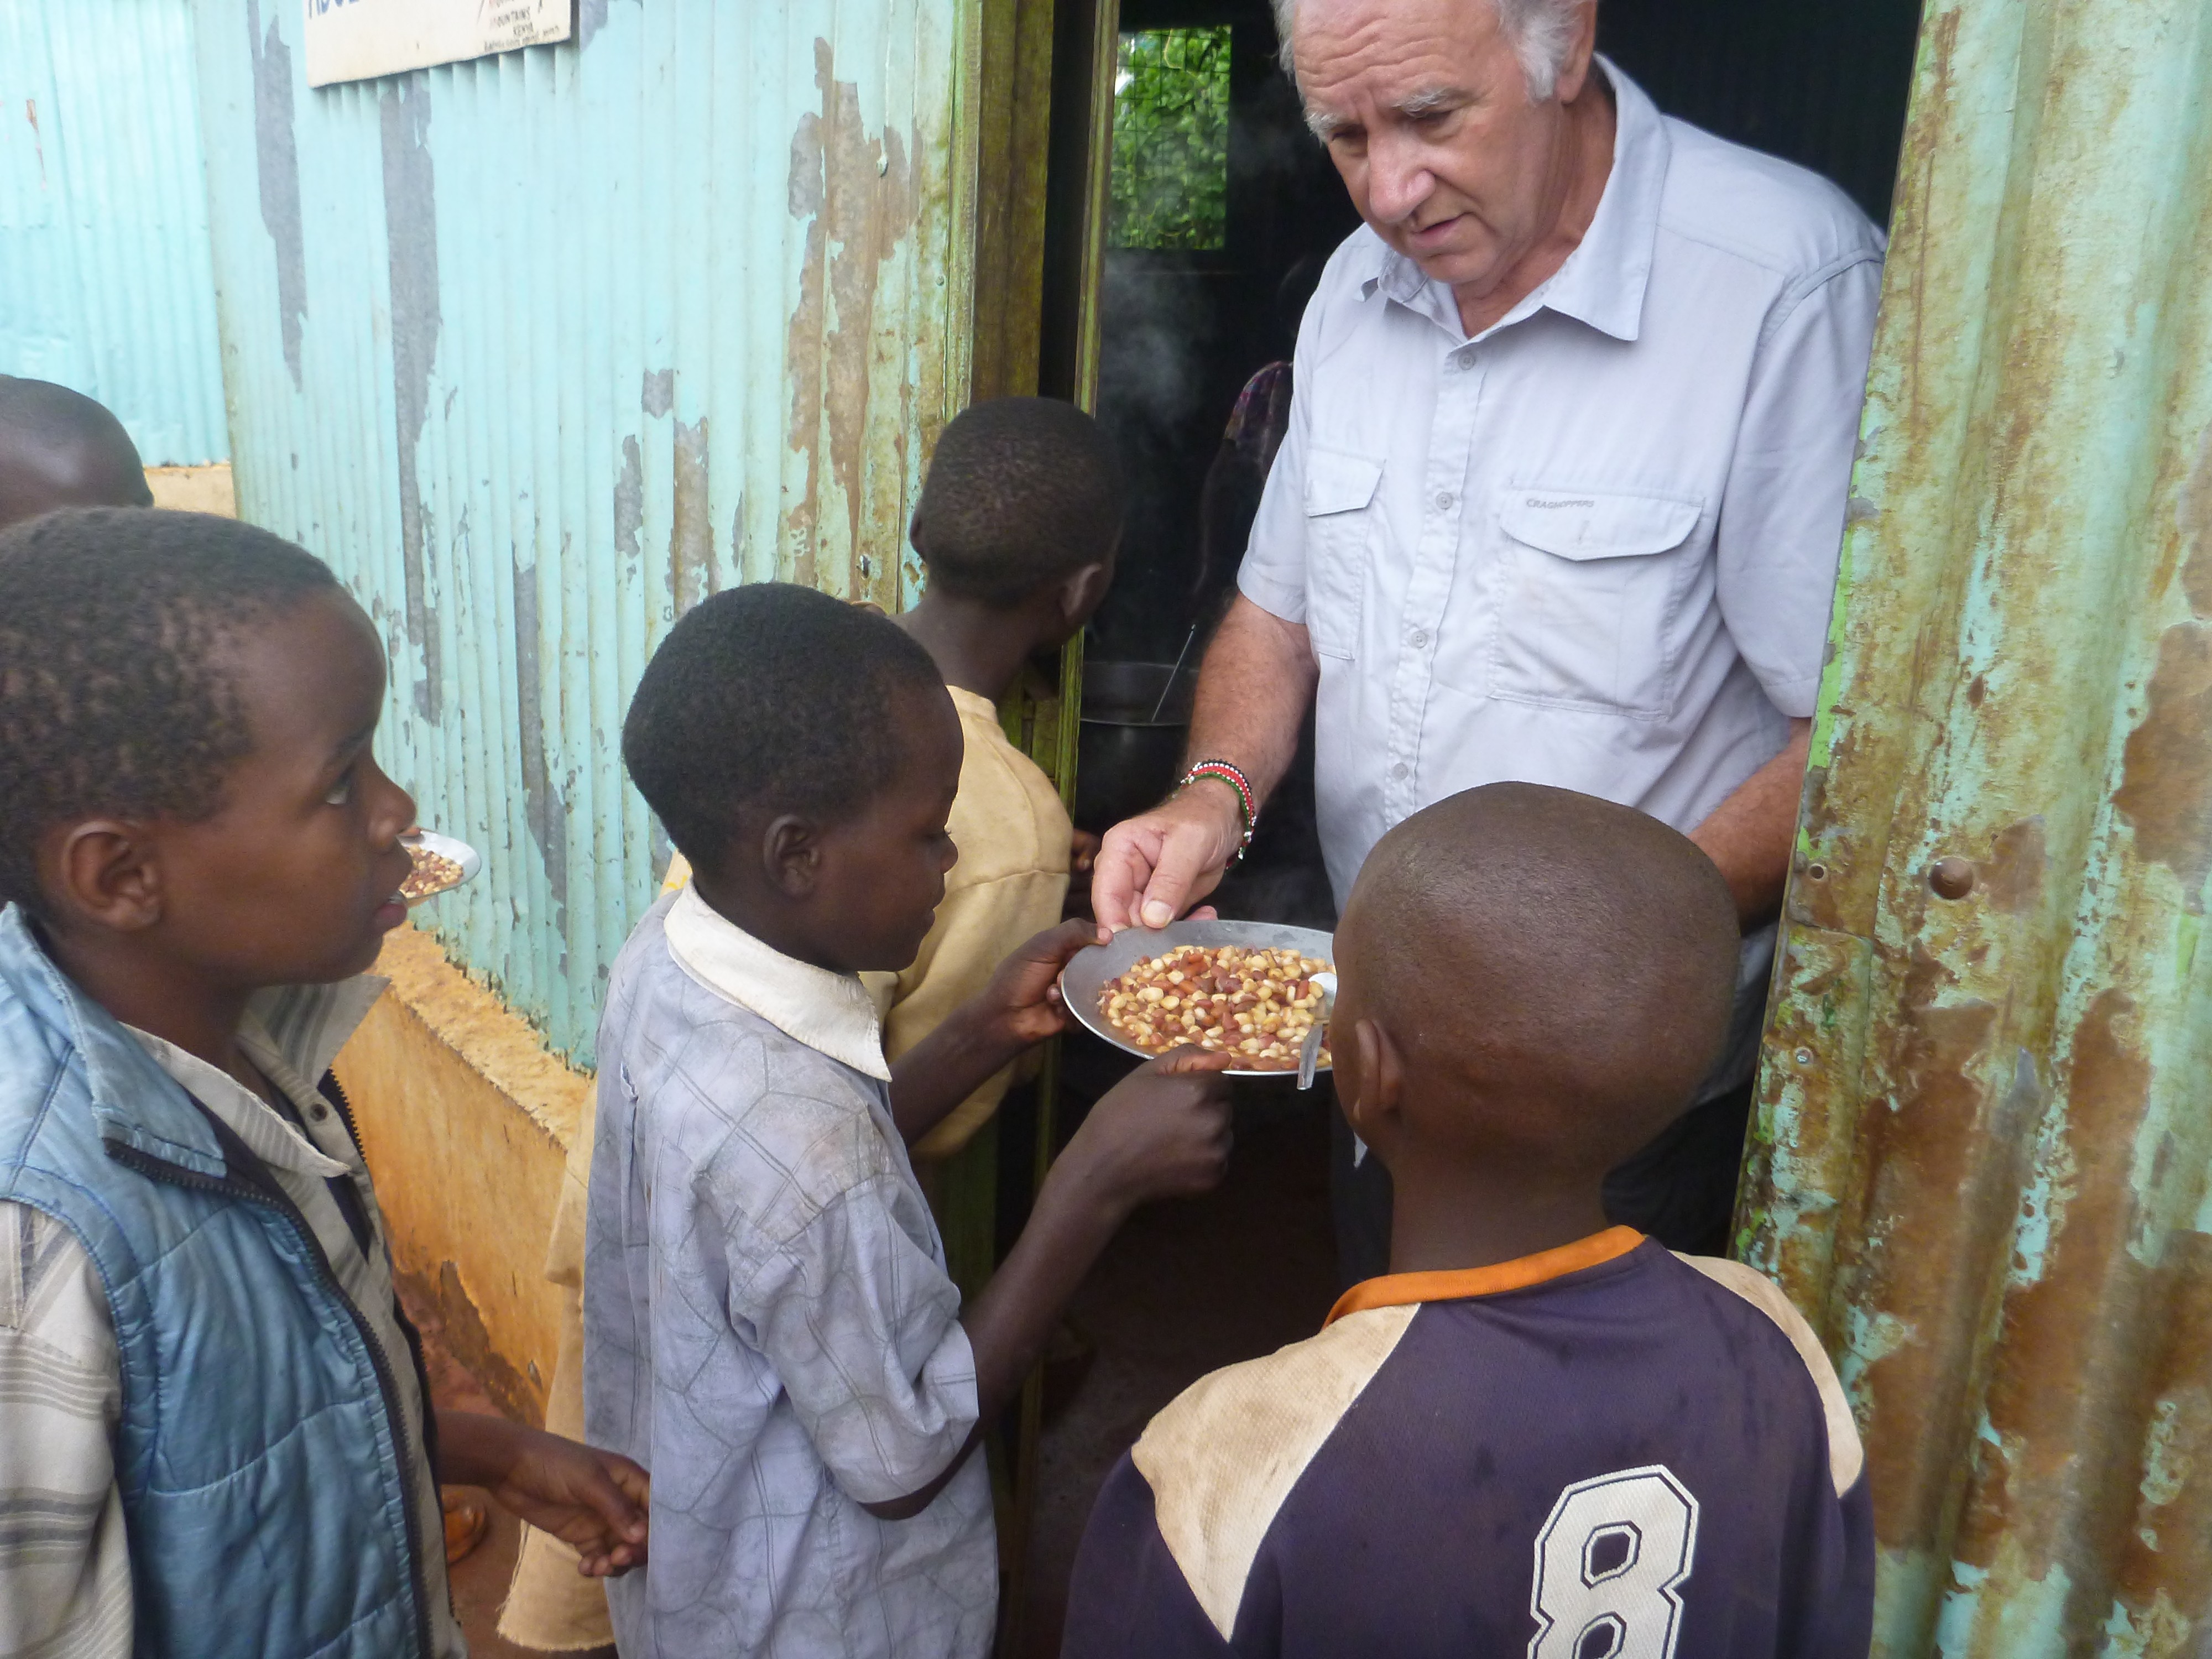 Roger handing out meals to the many Street Children